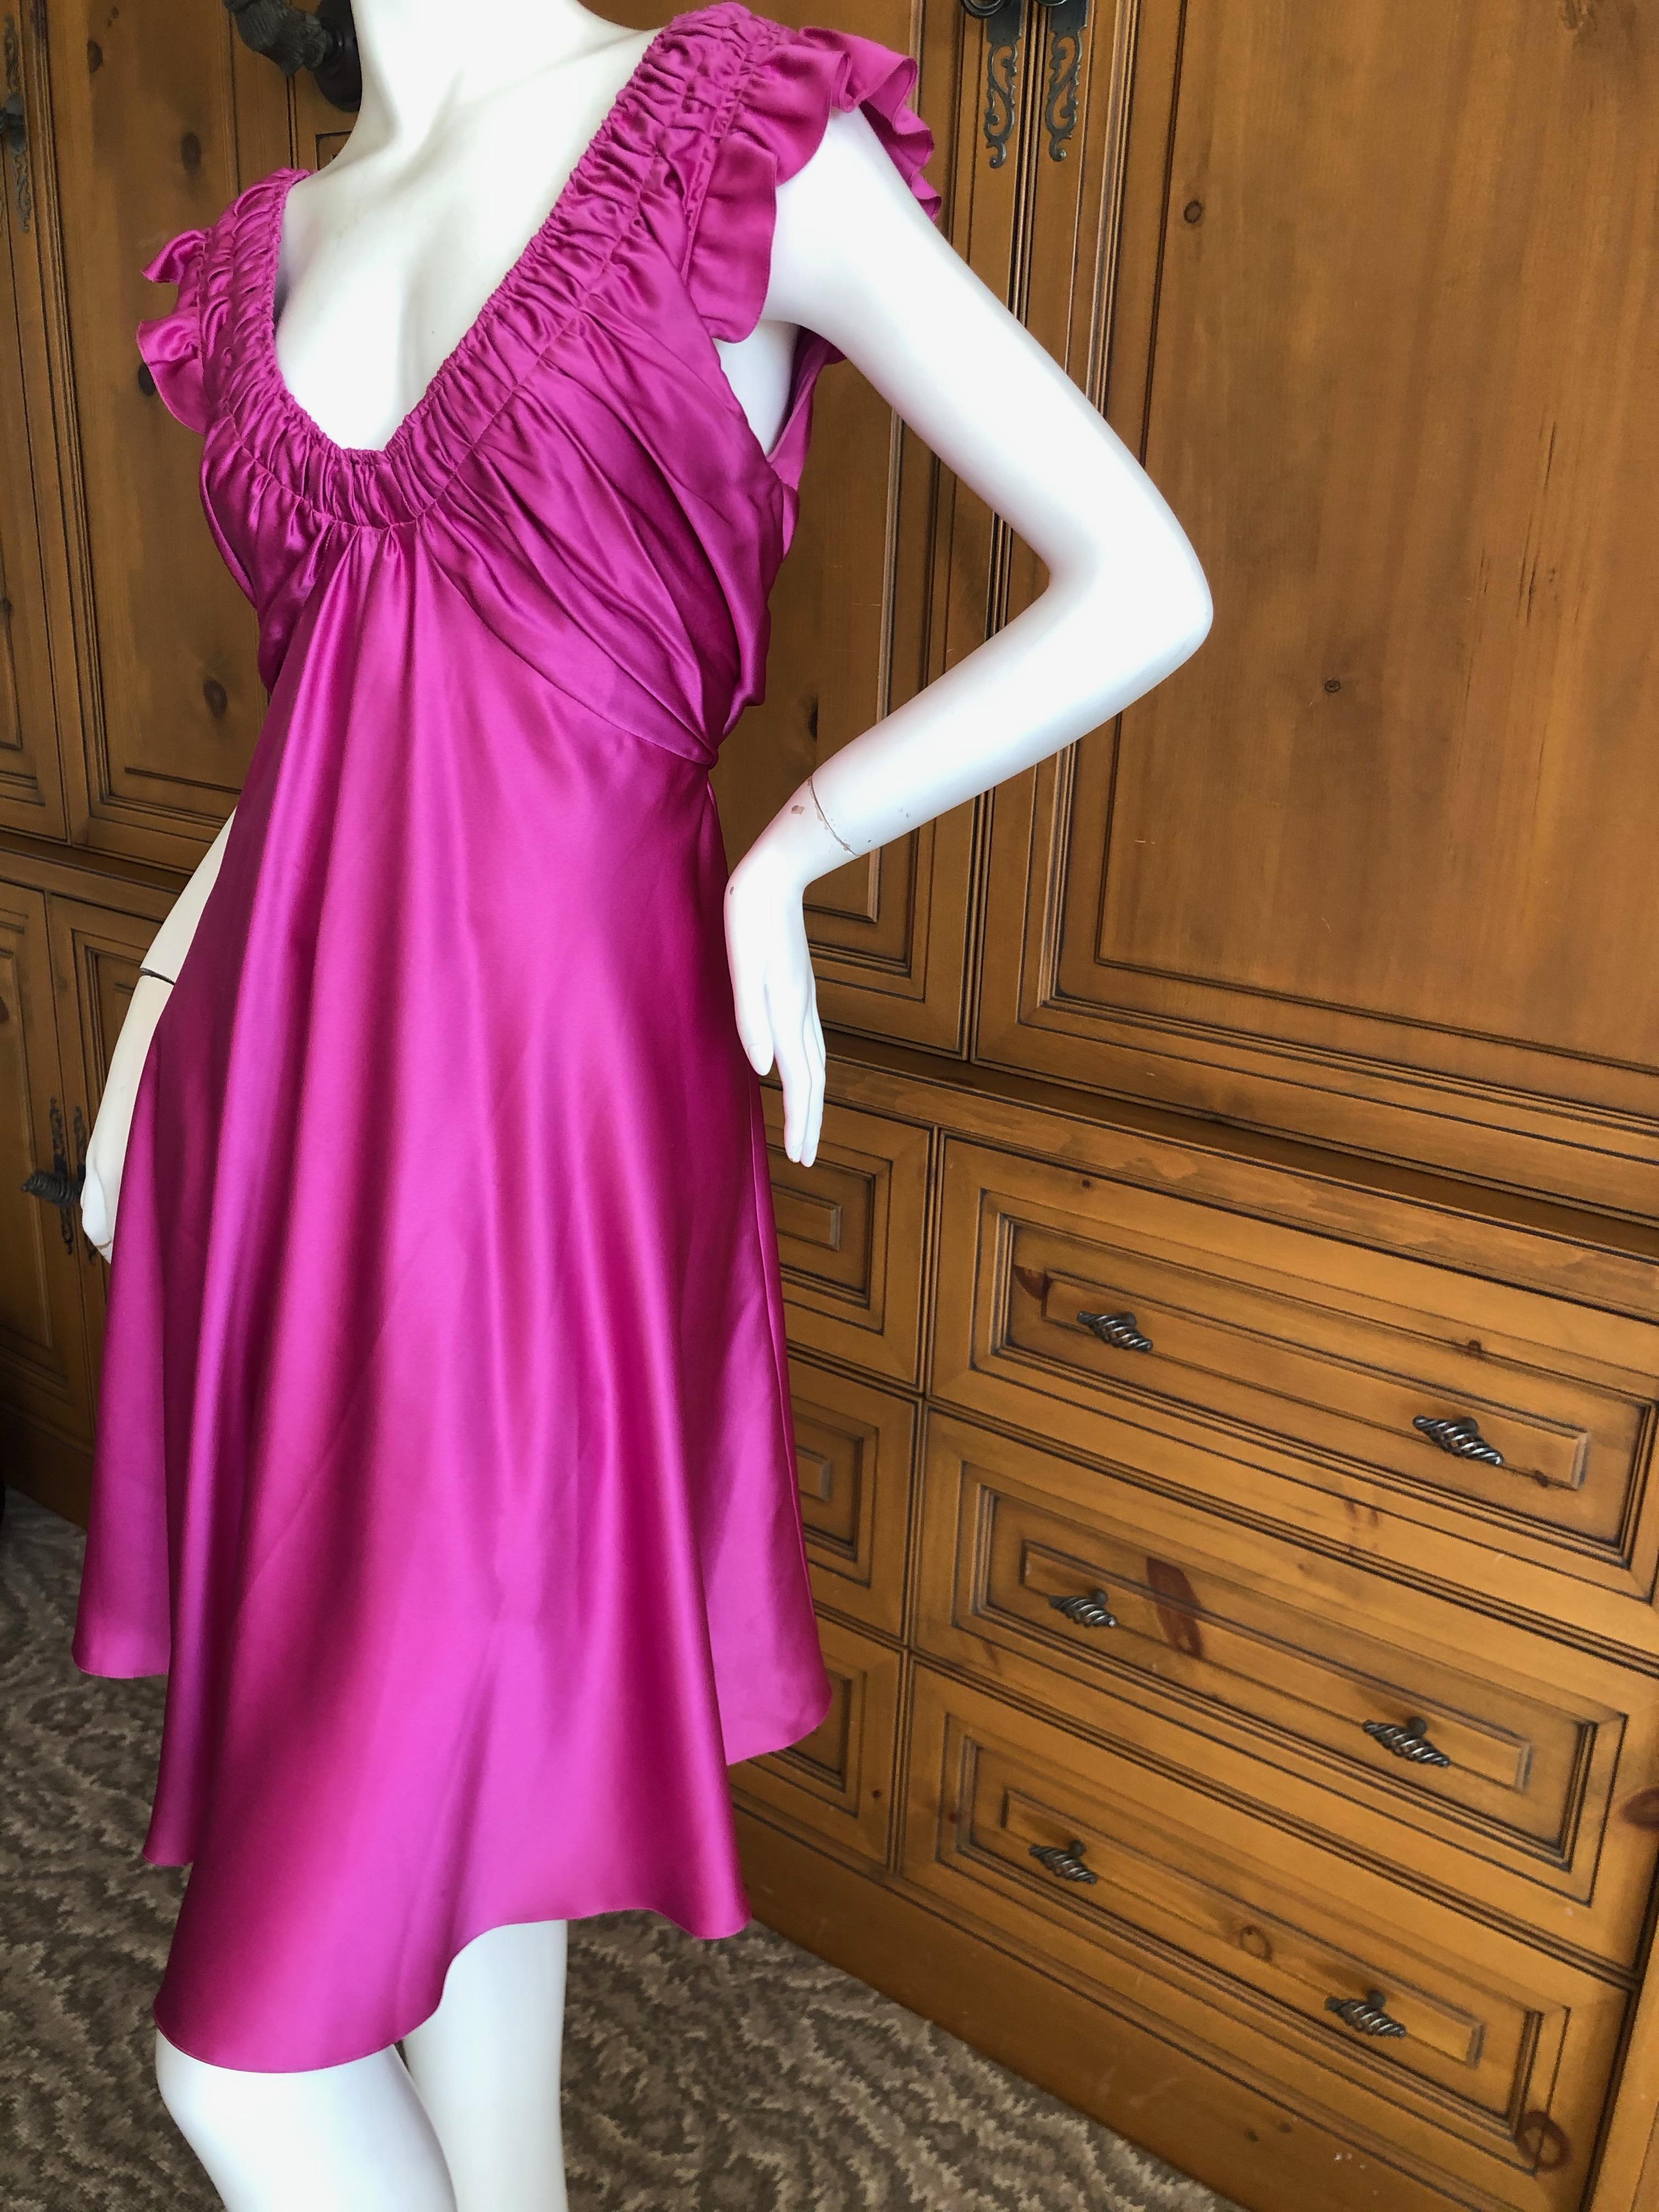   John Galliano Vintage Pink Low Cut Dress with Gathered Details For Sale 2